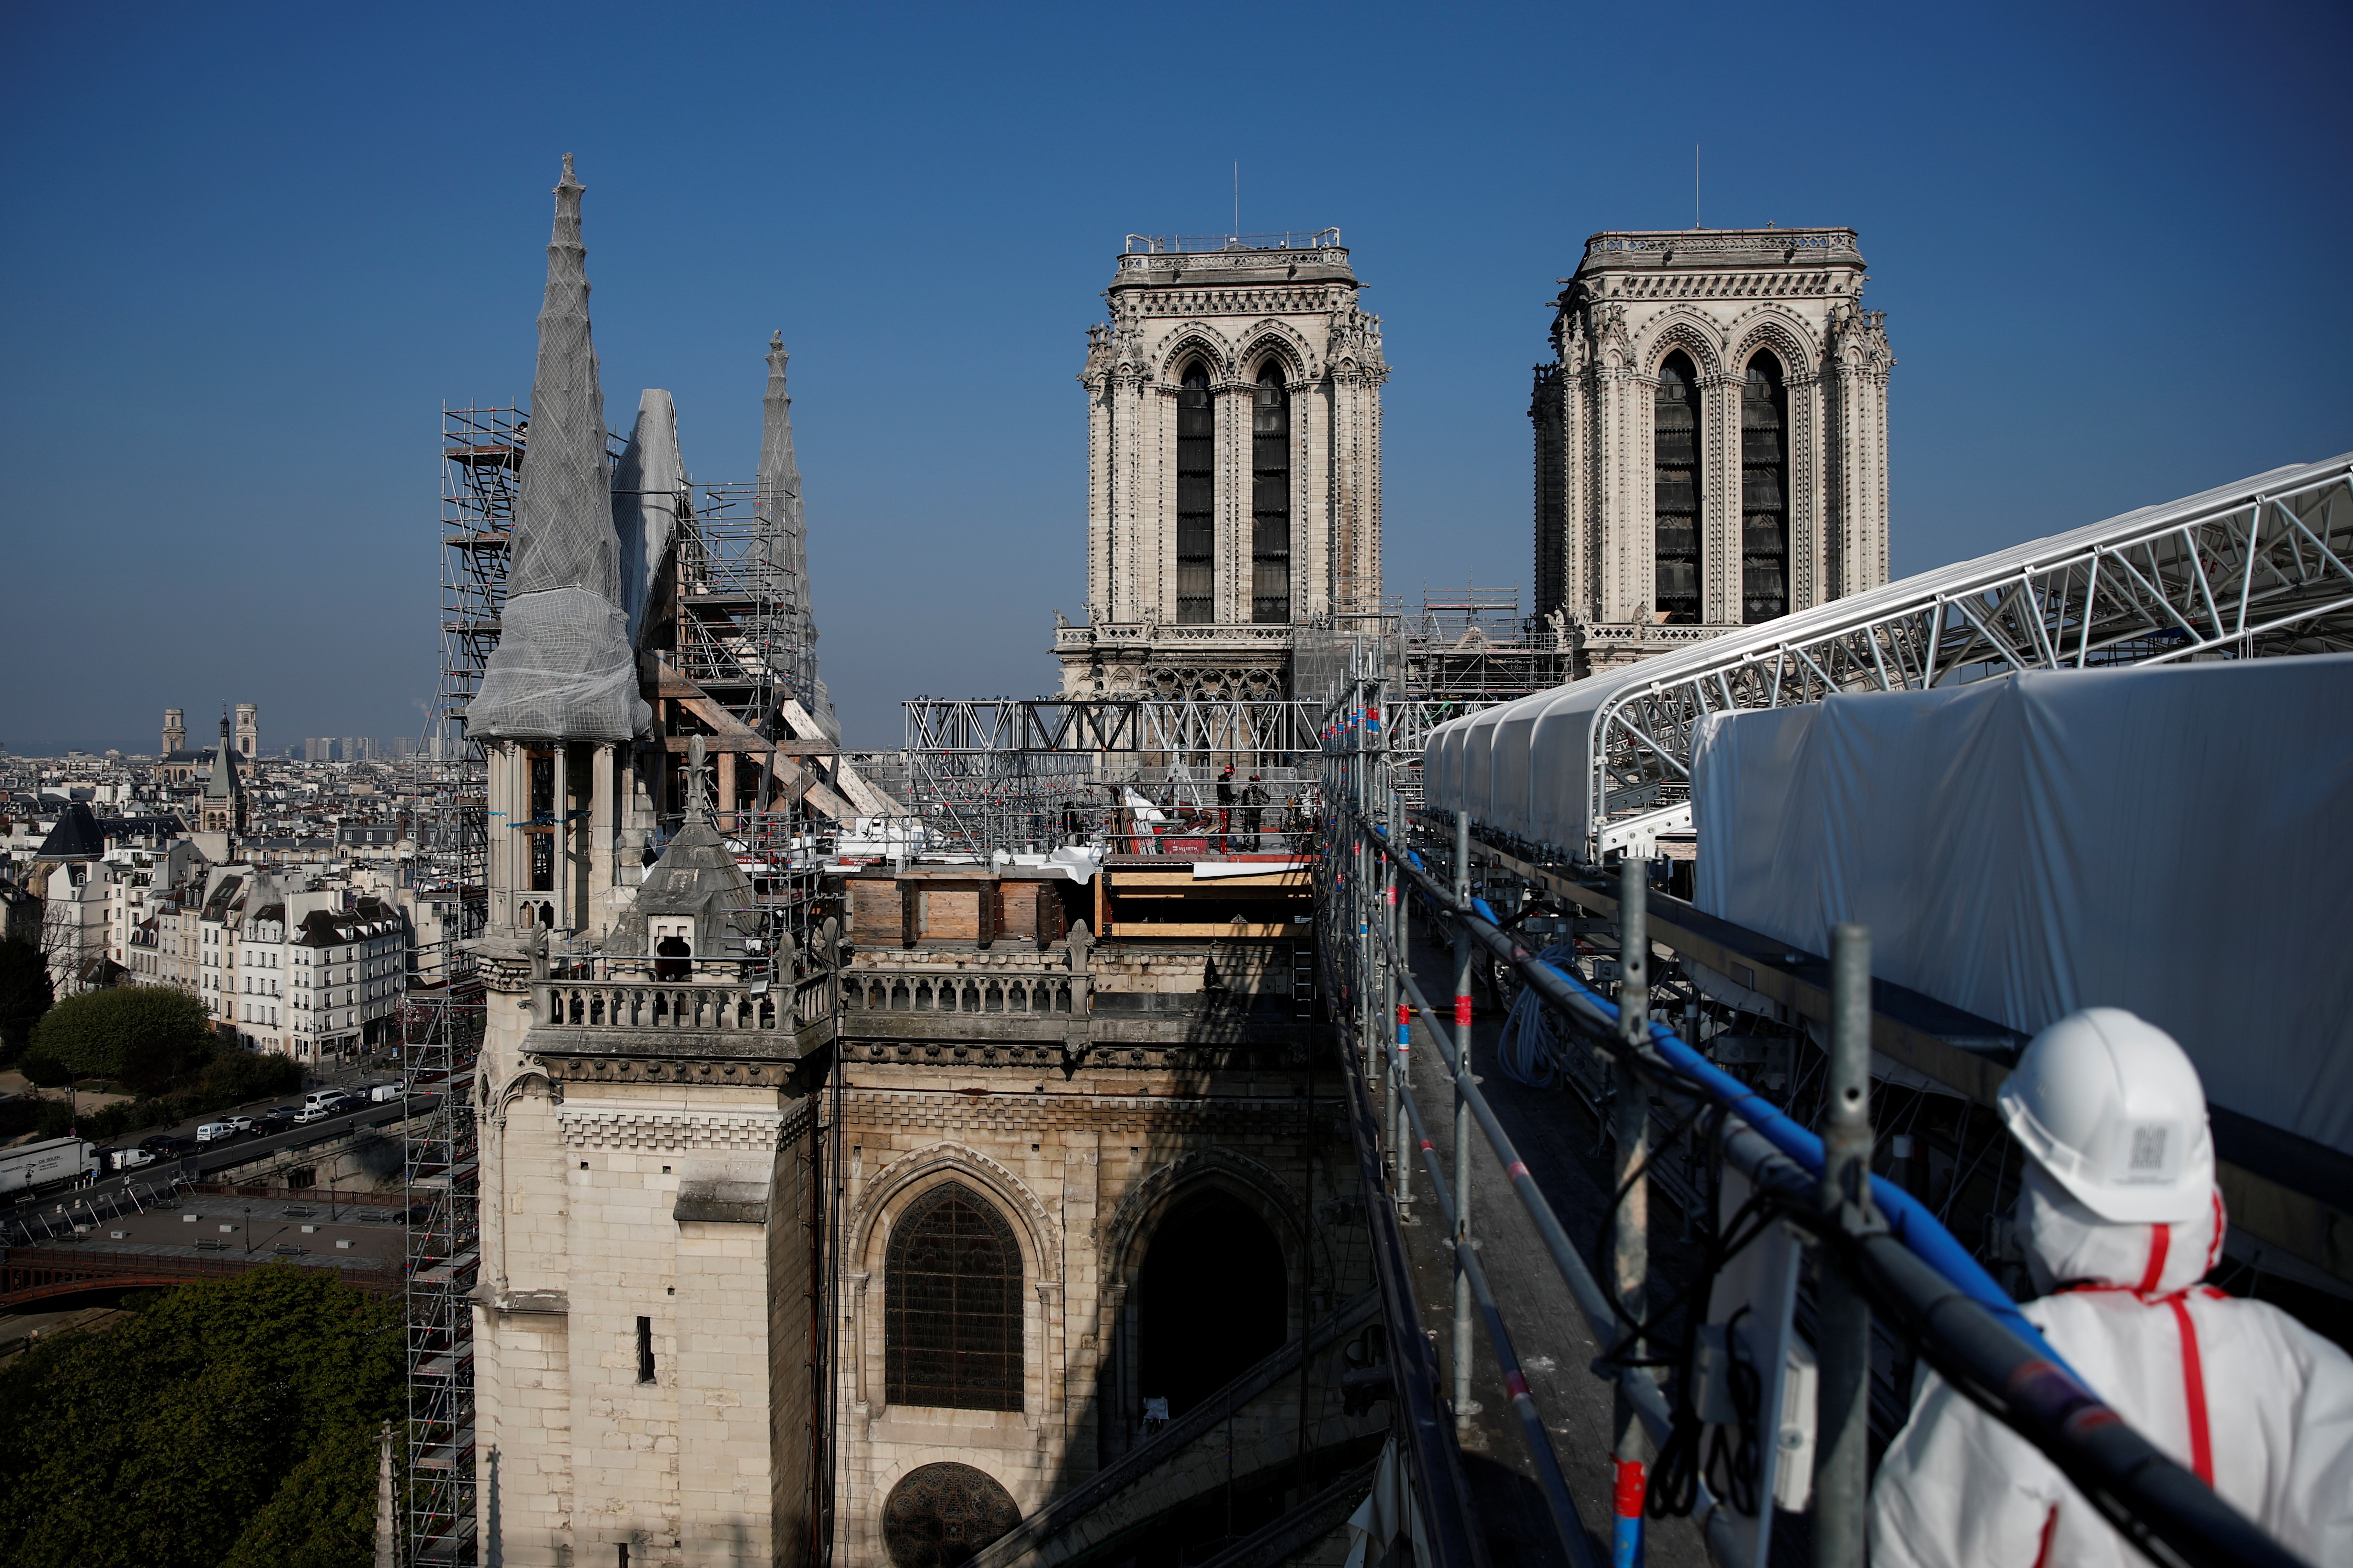 View of the reconstruction site of the roof of the Notre-Dame de Paris Cathedral, which was damaged in a devastating fire two years ago, as restoration works continue, in Paris, France, April 15, 2021. REUTERS/Benoit Tessier/Pool